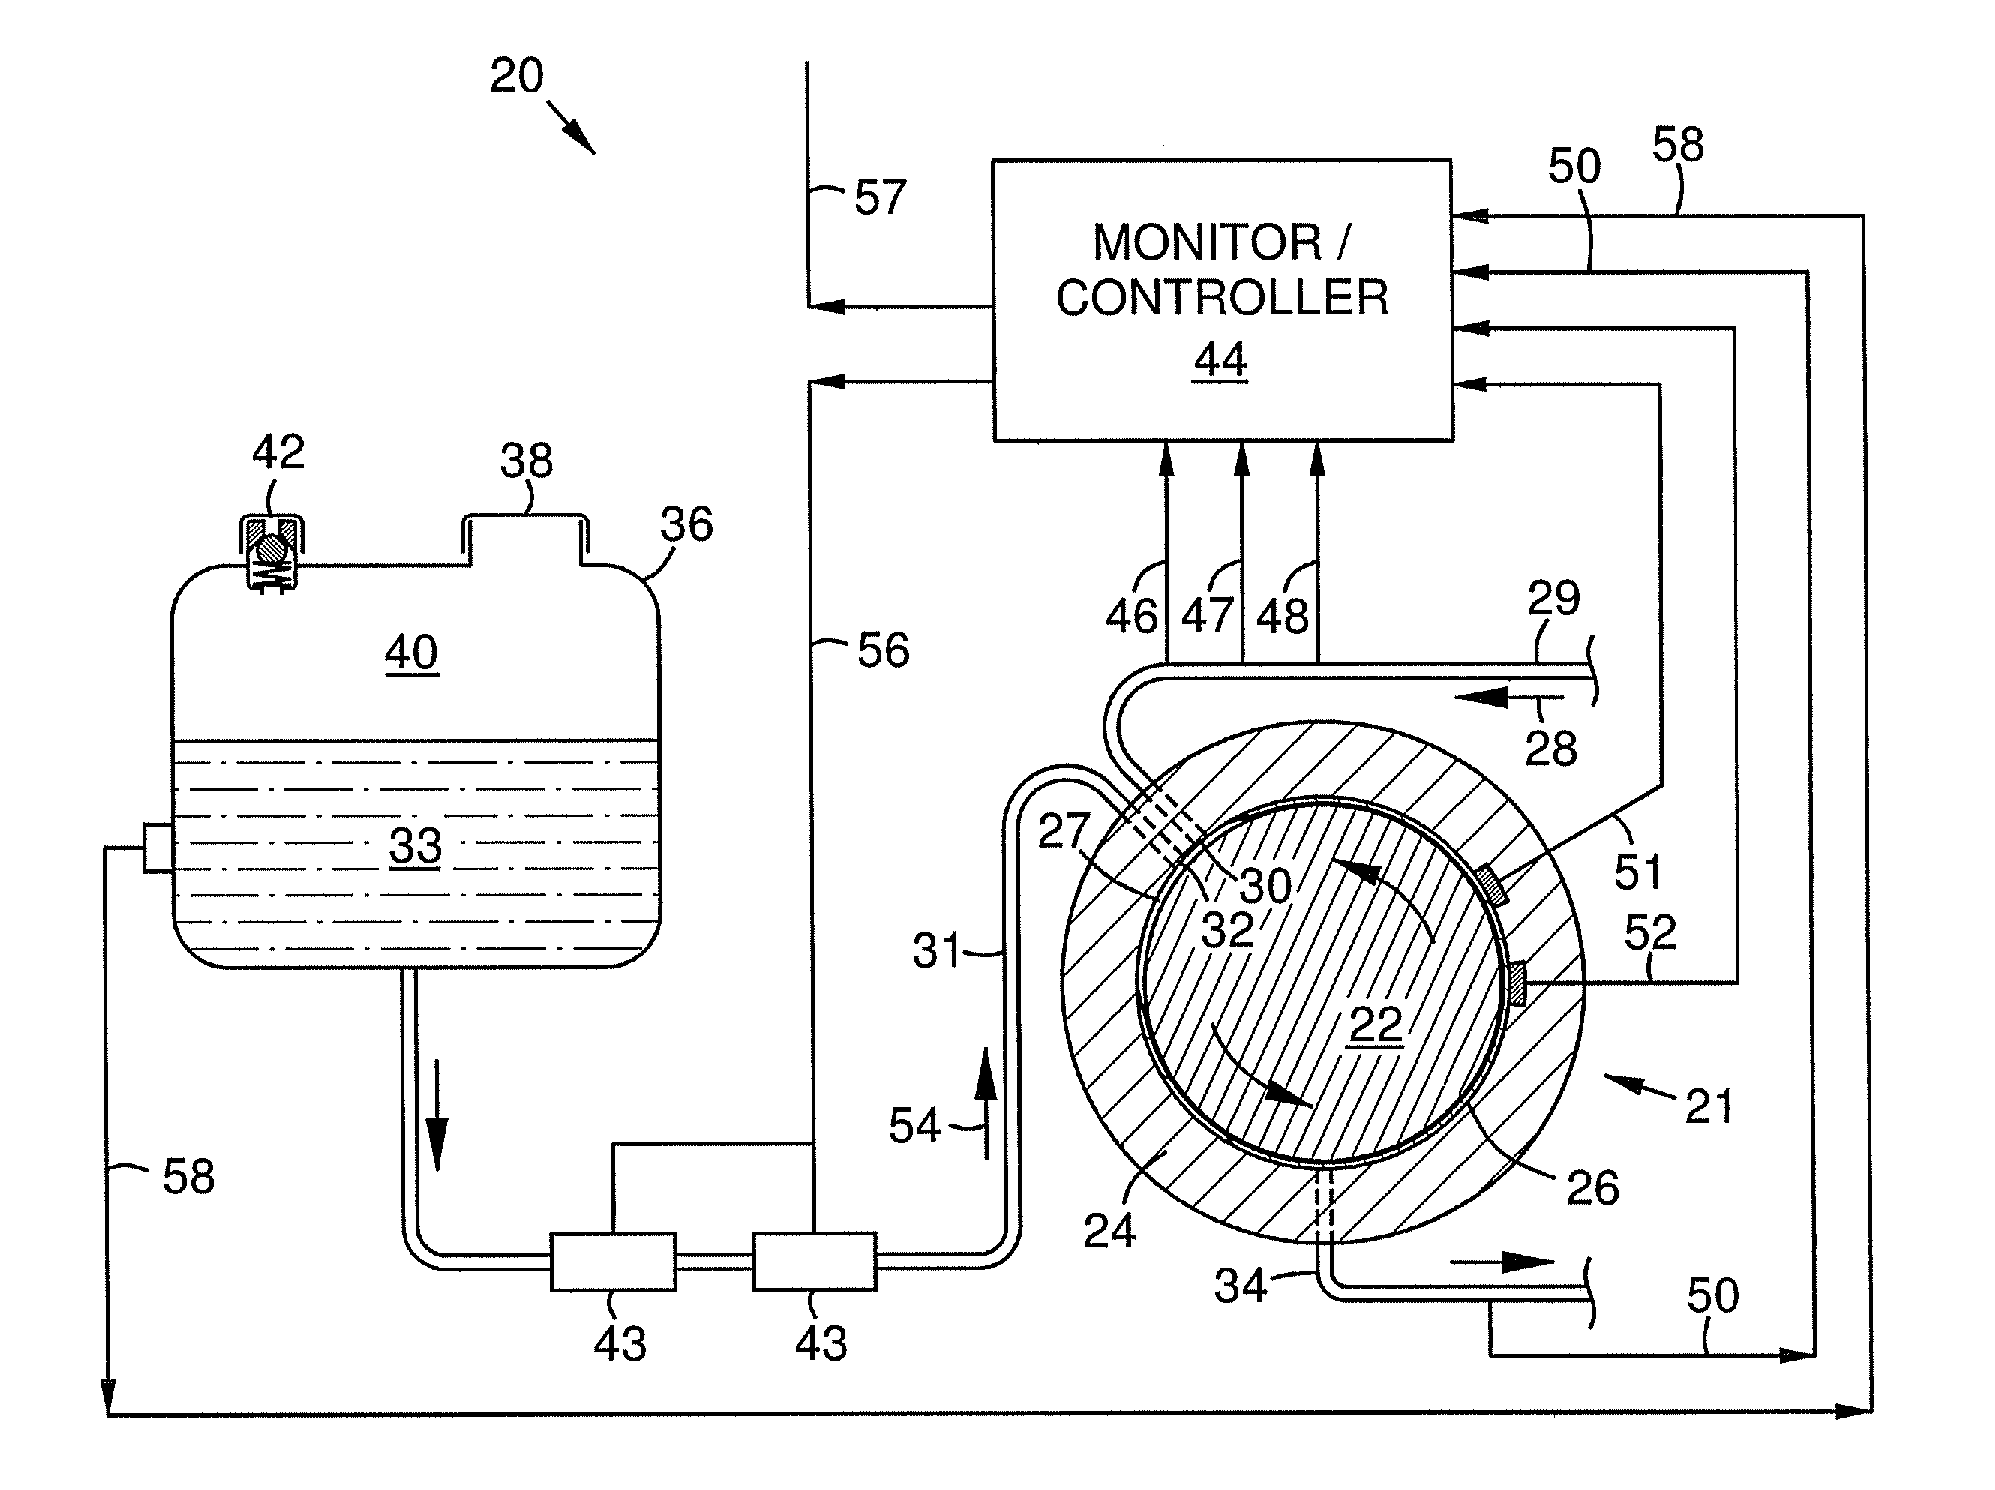 Backup Lubrication System For A Rotor Bearing